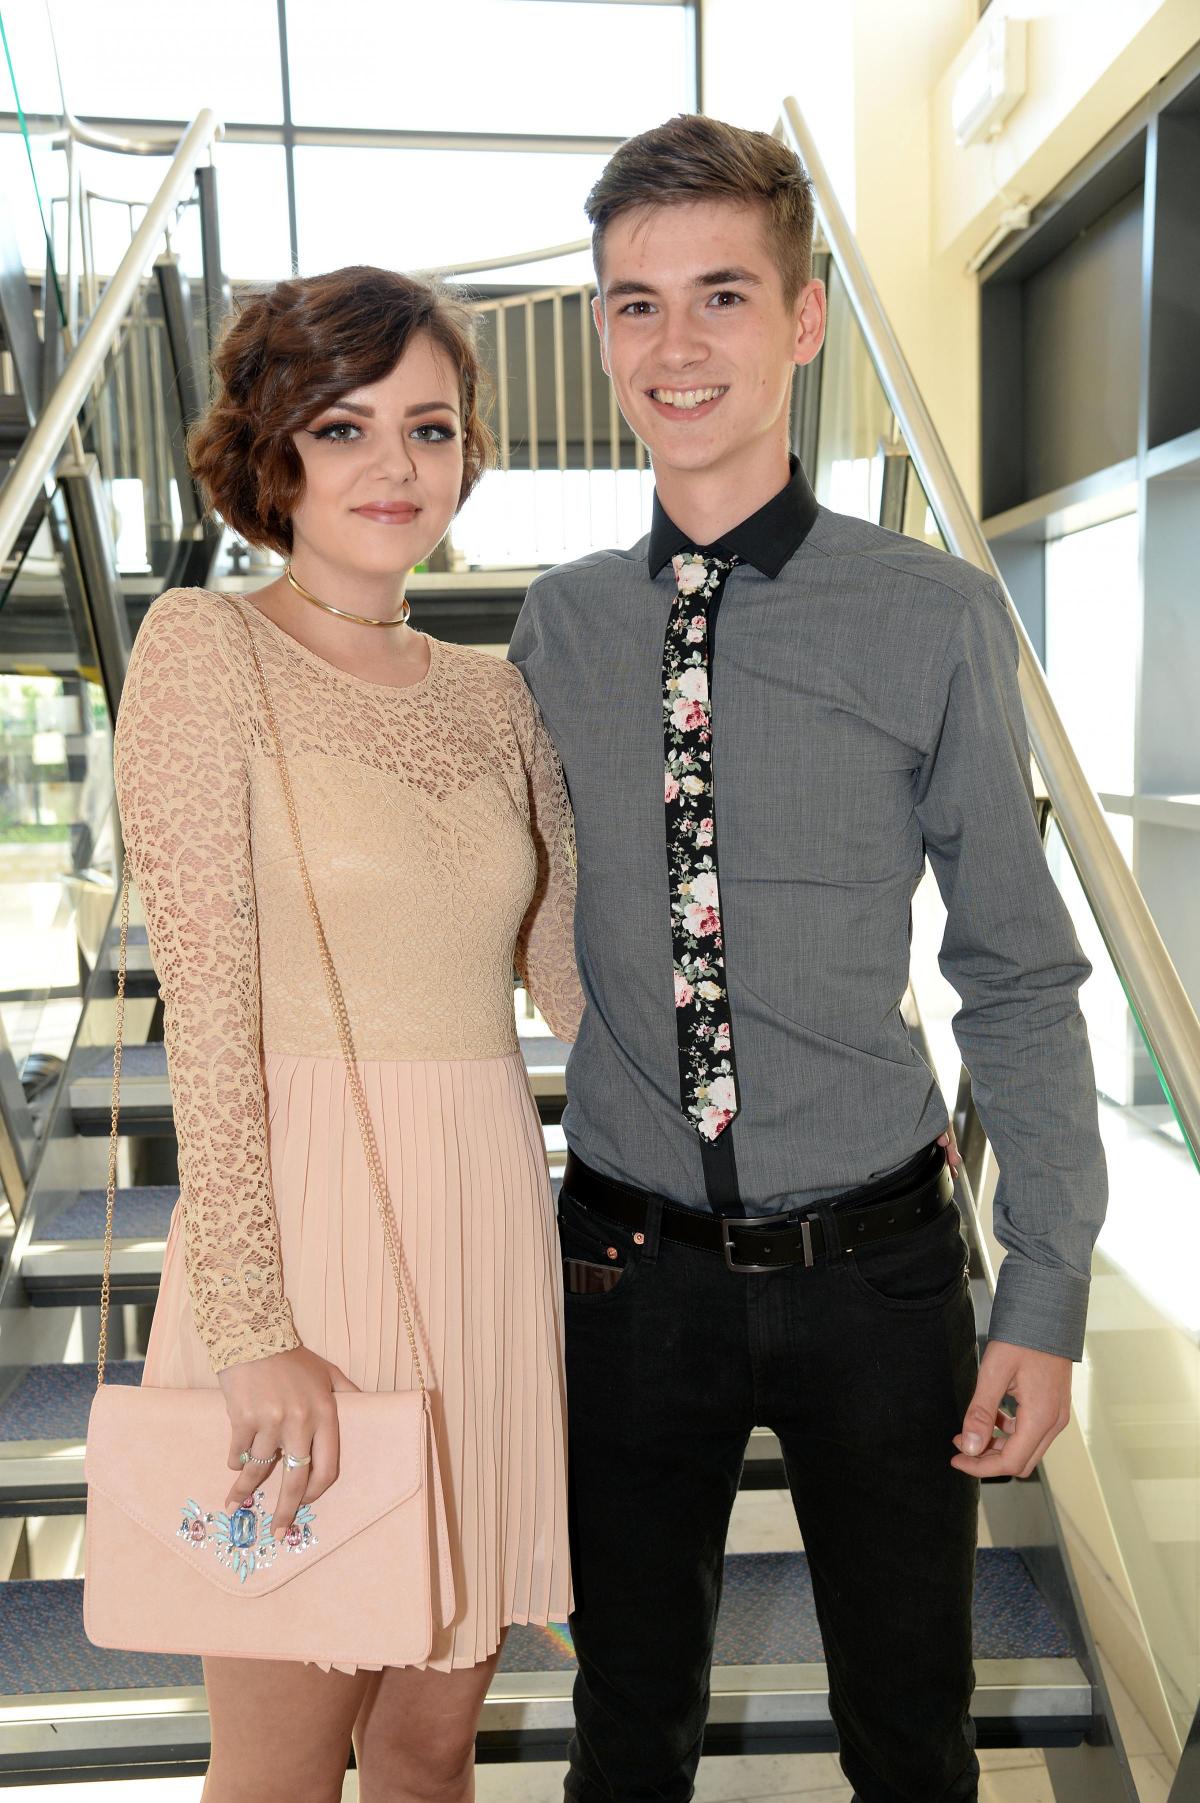 Budmouth Year 13 Prom 2015 - Pictures by John Gurd